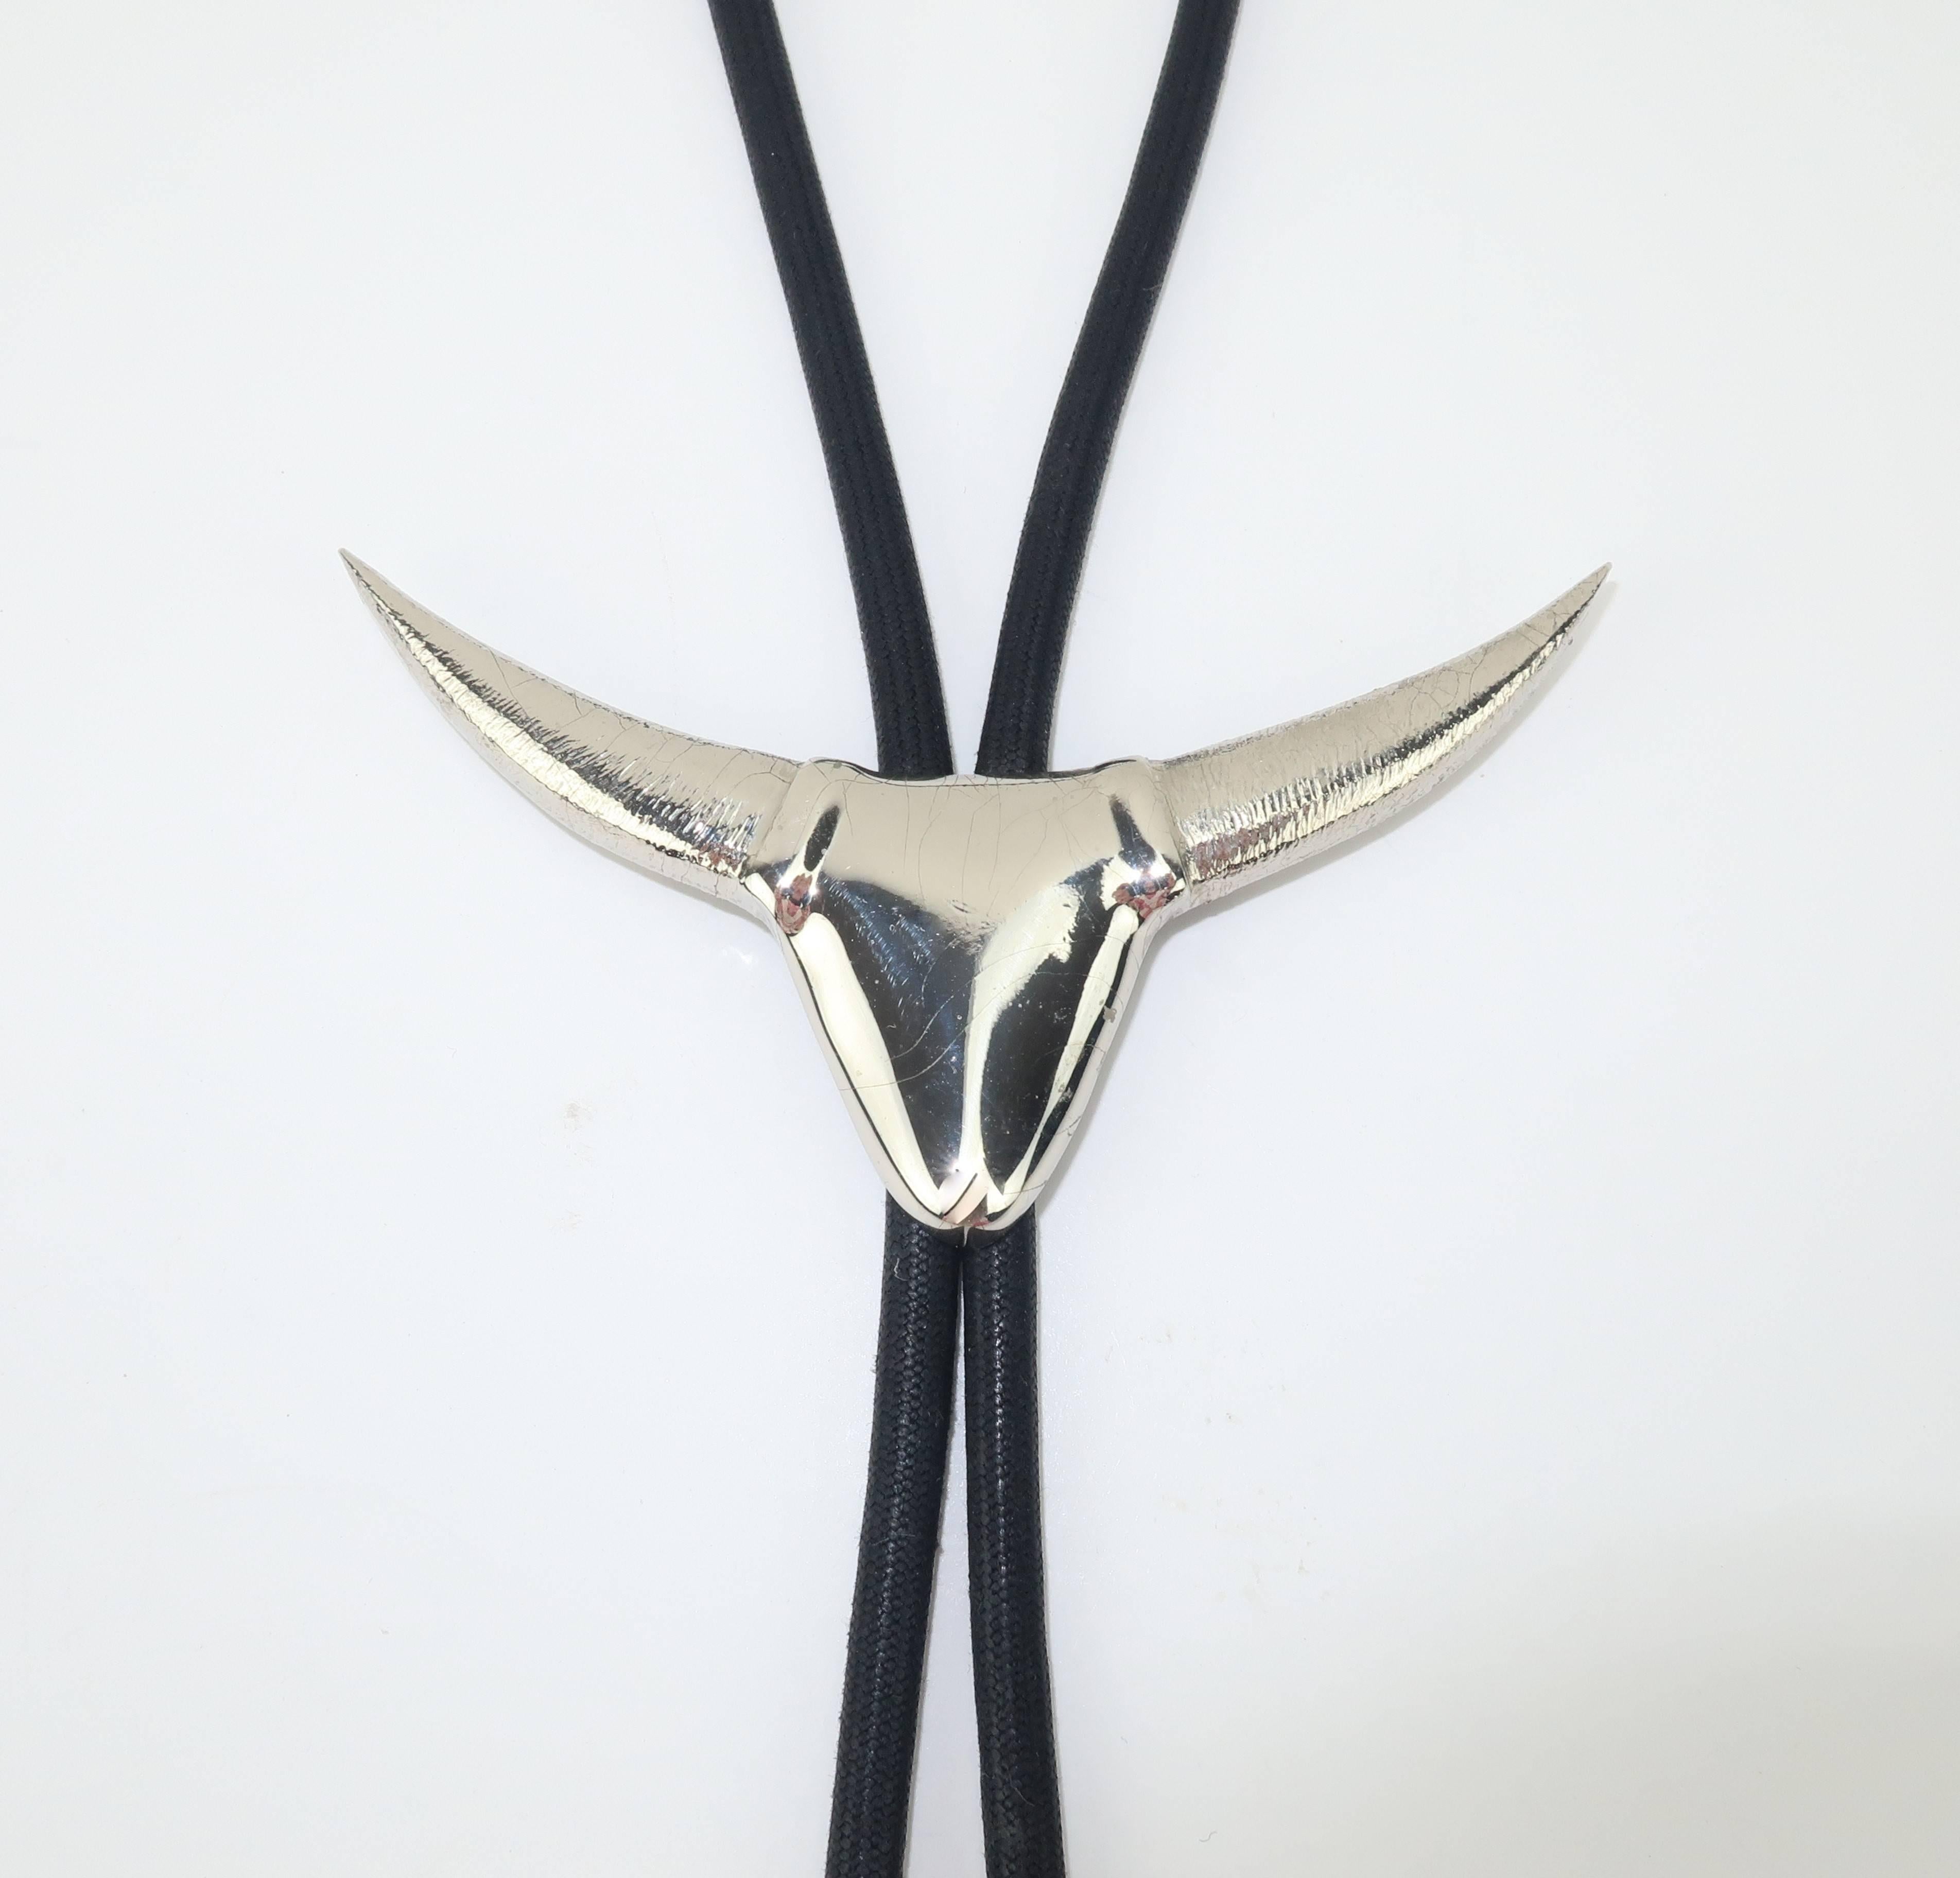 French designer Thierry Mugler is a master of the innovative suit incorporating strong shoulders and wasp waist silhouettes to create a feminine elegance with a healthy dose of sex appeal.  This combination of a chromed base metal longhorn brooch